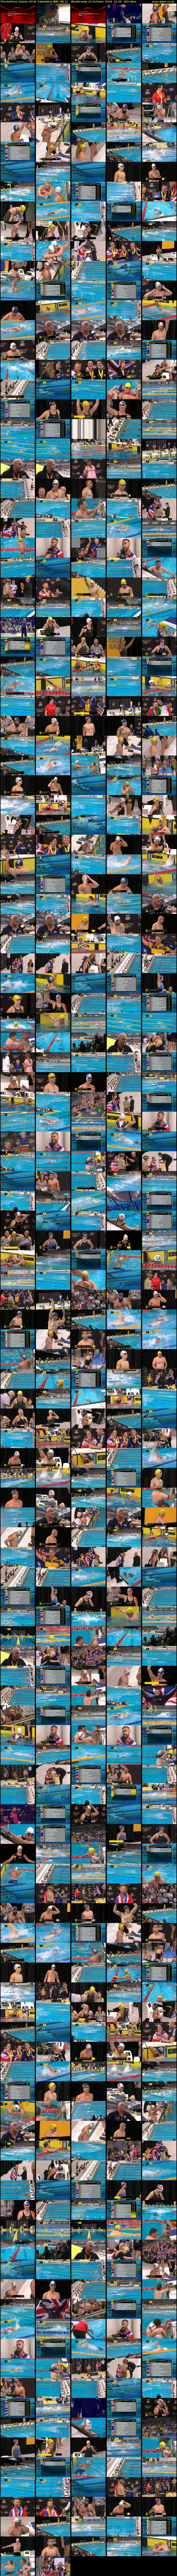 The Invictus Games 2018: Swimming (BBC RB 1) Wednesday 24 October 2018 22:30 - 04:30